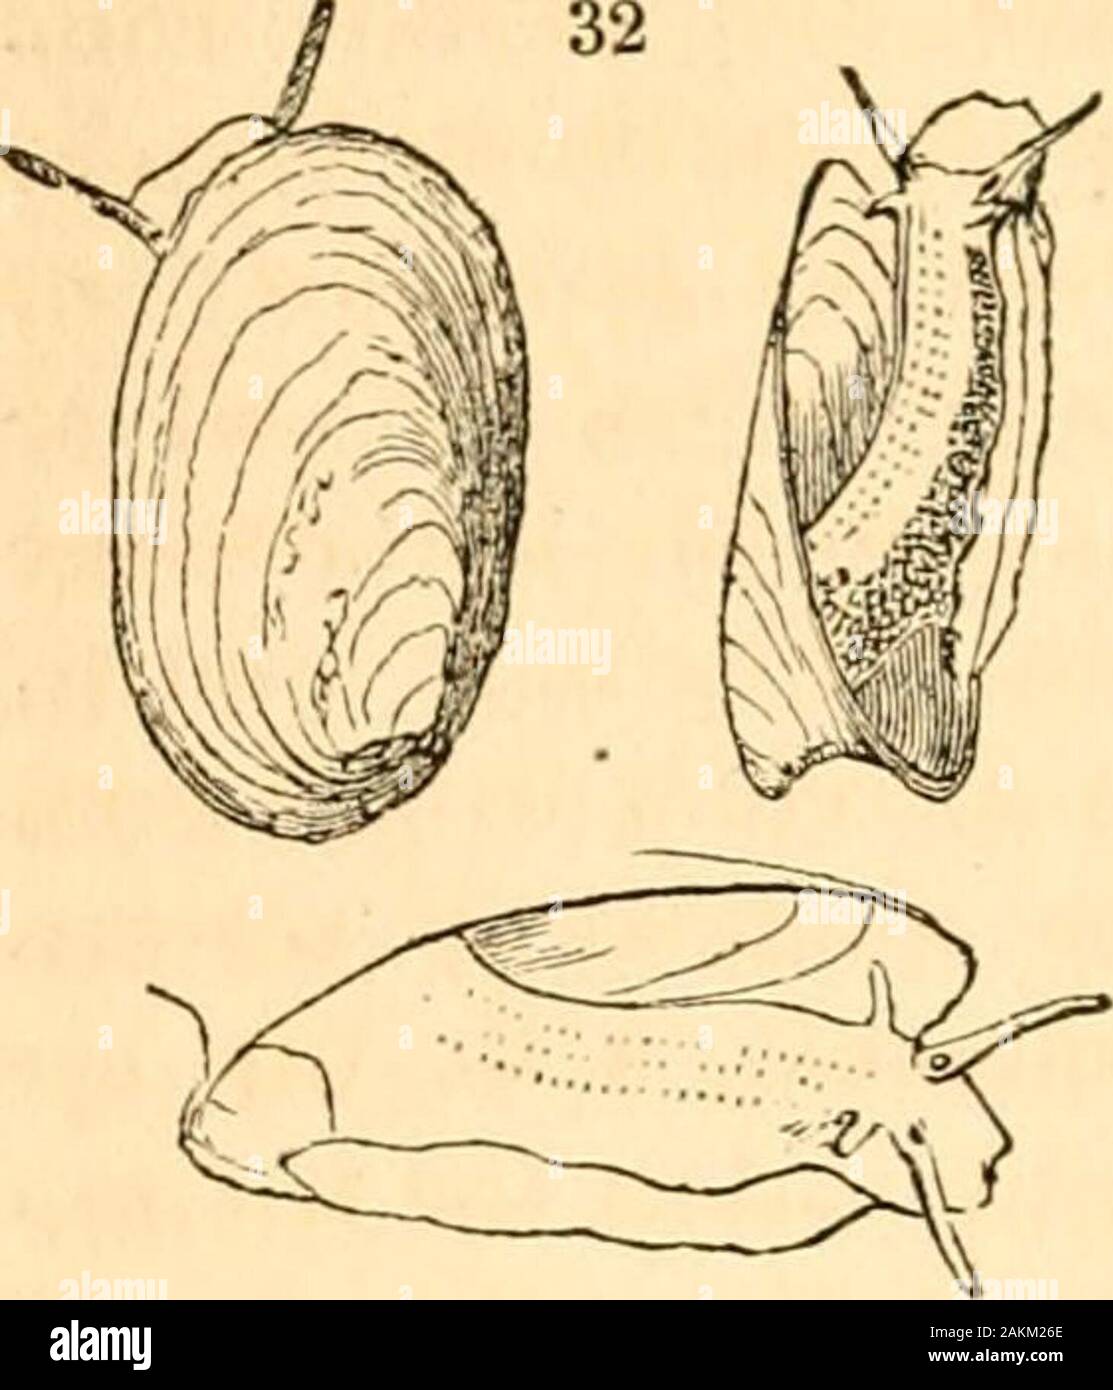 A treatise on malacology; or, Shells and shell fish . * Ency. Meth. pi. 459. fig. 7- 188 SHELLS AND SHELL-FISH. PART I. for this fold on the pillar, it could not be distinguishedfrom a Limnceus. The fifth and last type is Ancylus,composed of the freshwater limpets (^fig. 32.), not even mentioned by Cuvier, but con-stituting one of the most re-markable divisions of the wholegroup. (173.) The five genera,placed opposite to those of thegenera of AchatincB, and thesub-families of the Helicidce,will be found to represent eachother thus: —. Generaof the I.imnacince. Planorbis. Ancylus. Pototnophila. Stock Photo